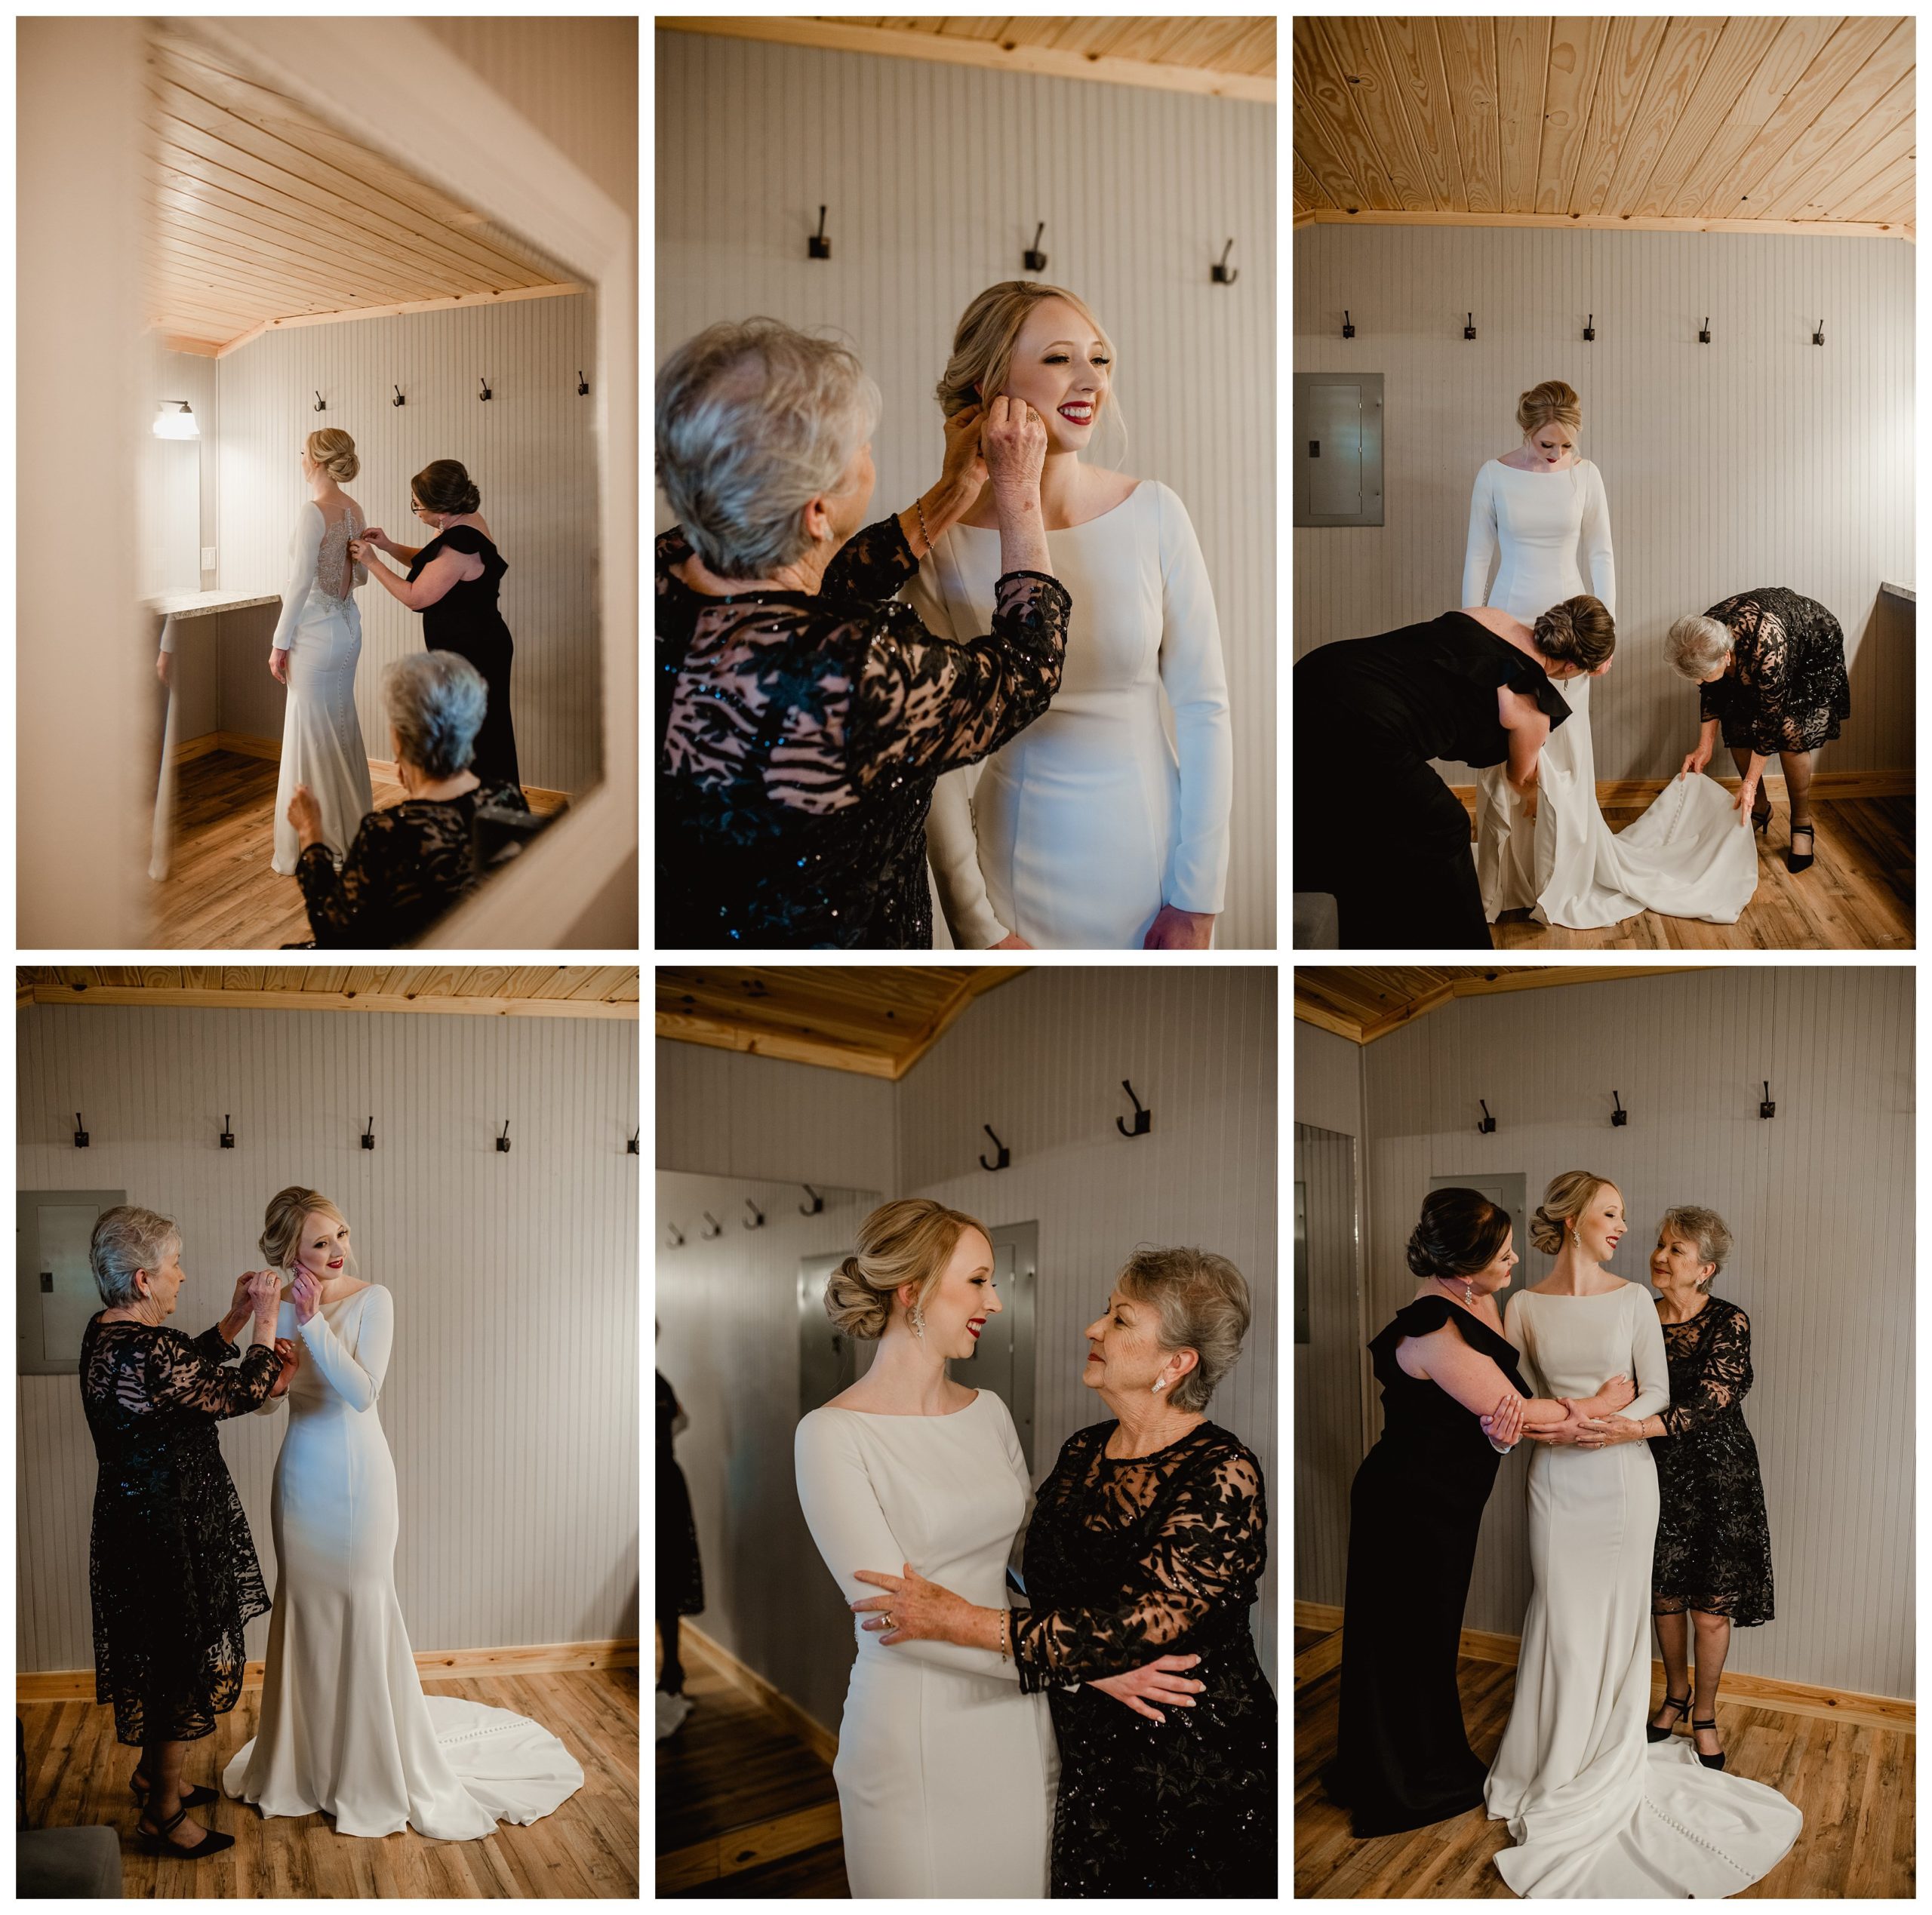 Bride shares emotional moments with her mother and grandmother on wedding day - Shelly Williams Photography